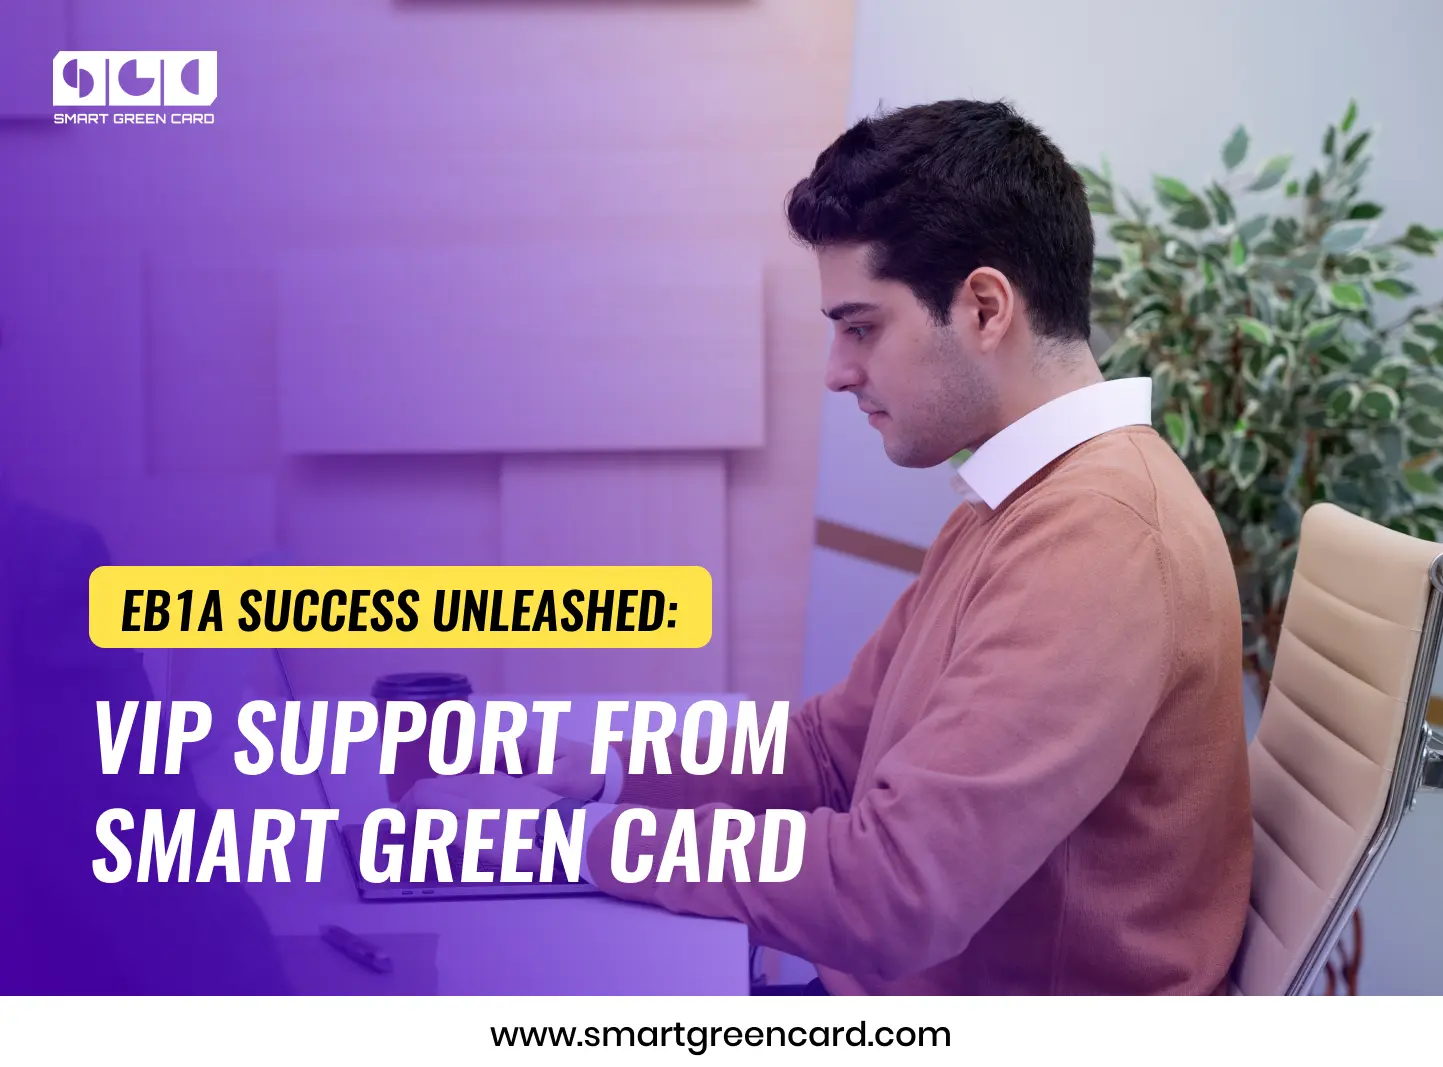 Smart Green Card VIP Plan for EB1A Assistance